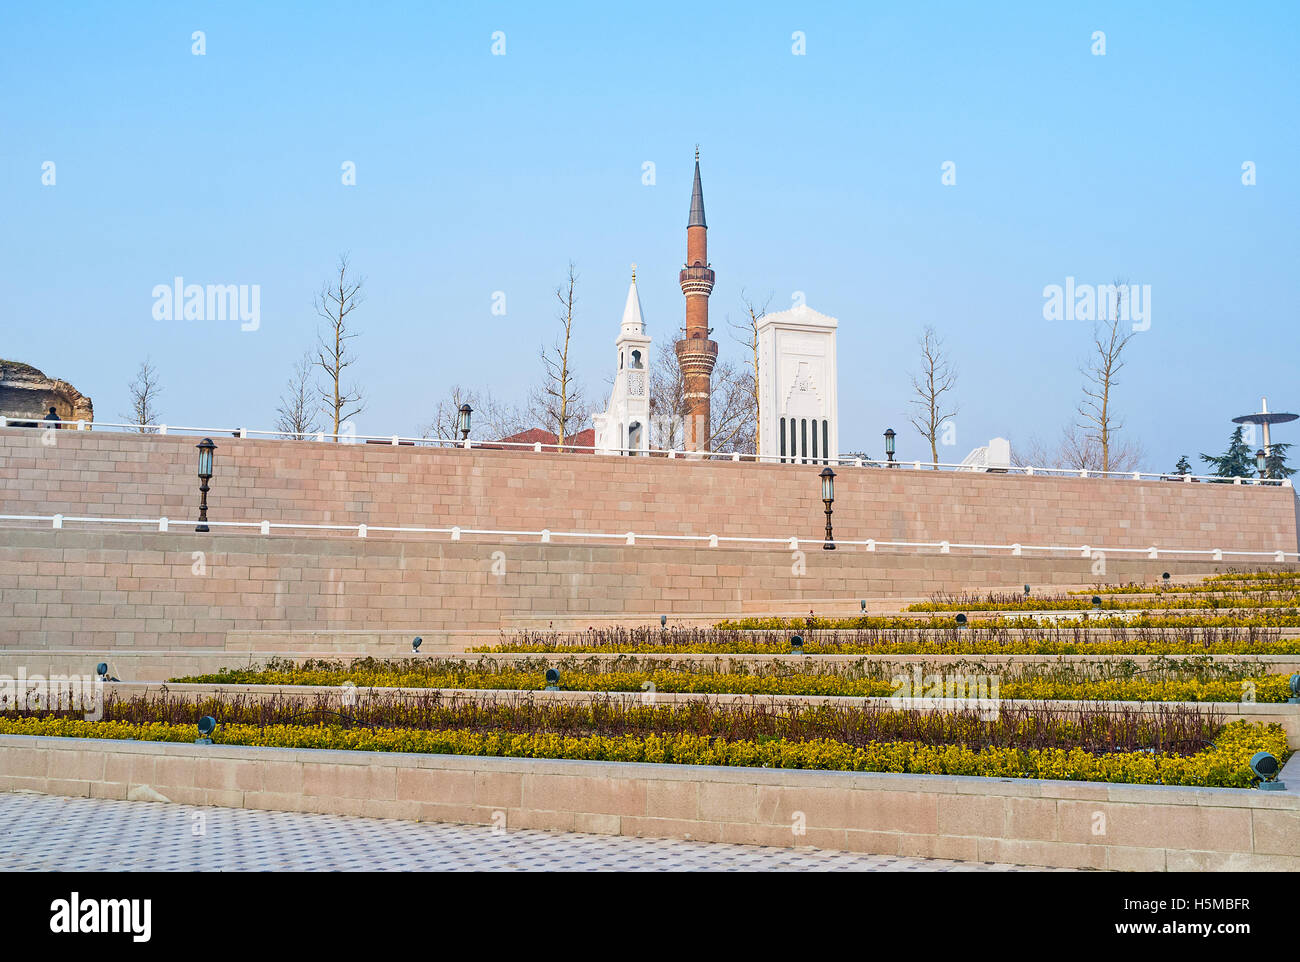 The scenic flower beds with the stone mihrab, minbar and the minaret of Haci Bayram Mosque on the background, Ankara, Turkey. Stock Photo